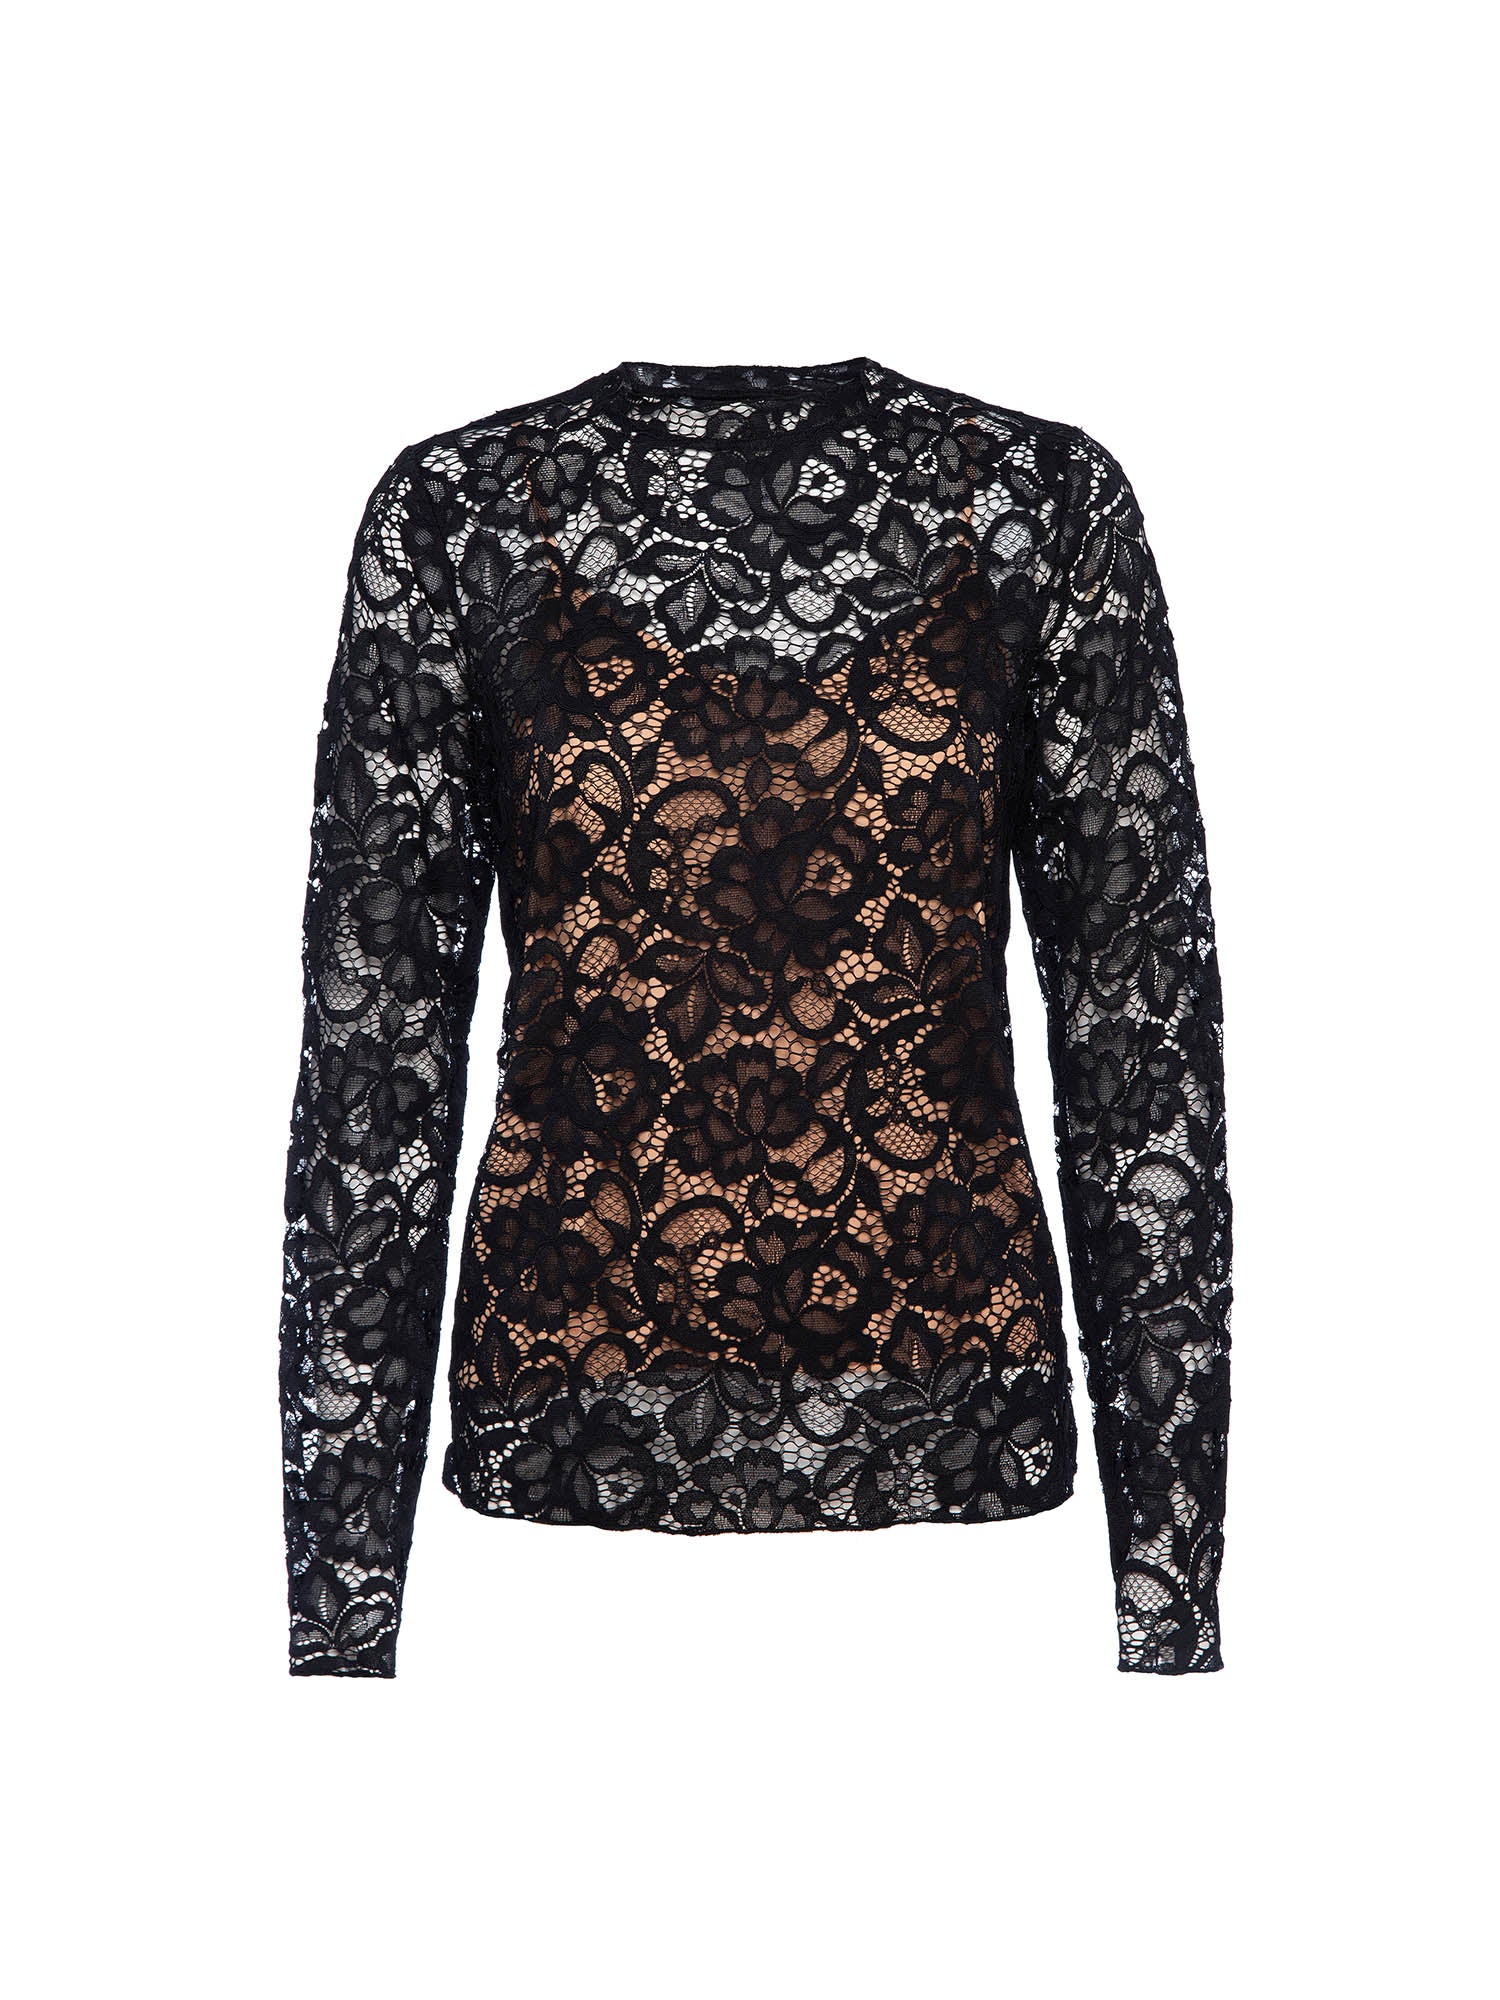 Women's Donne Floral Lace Top in Black Onyx